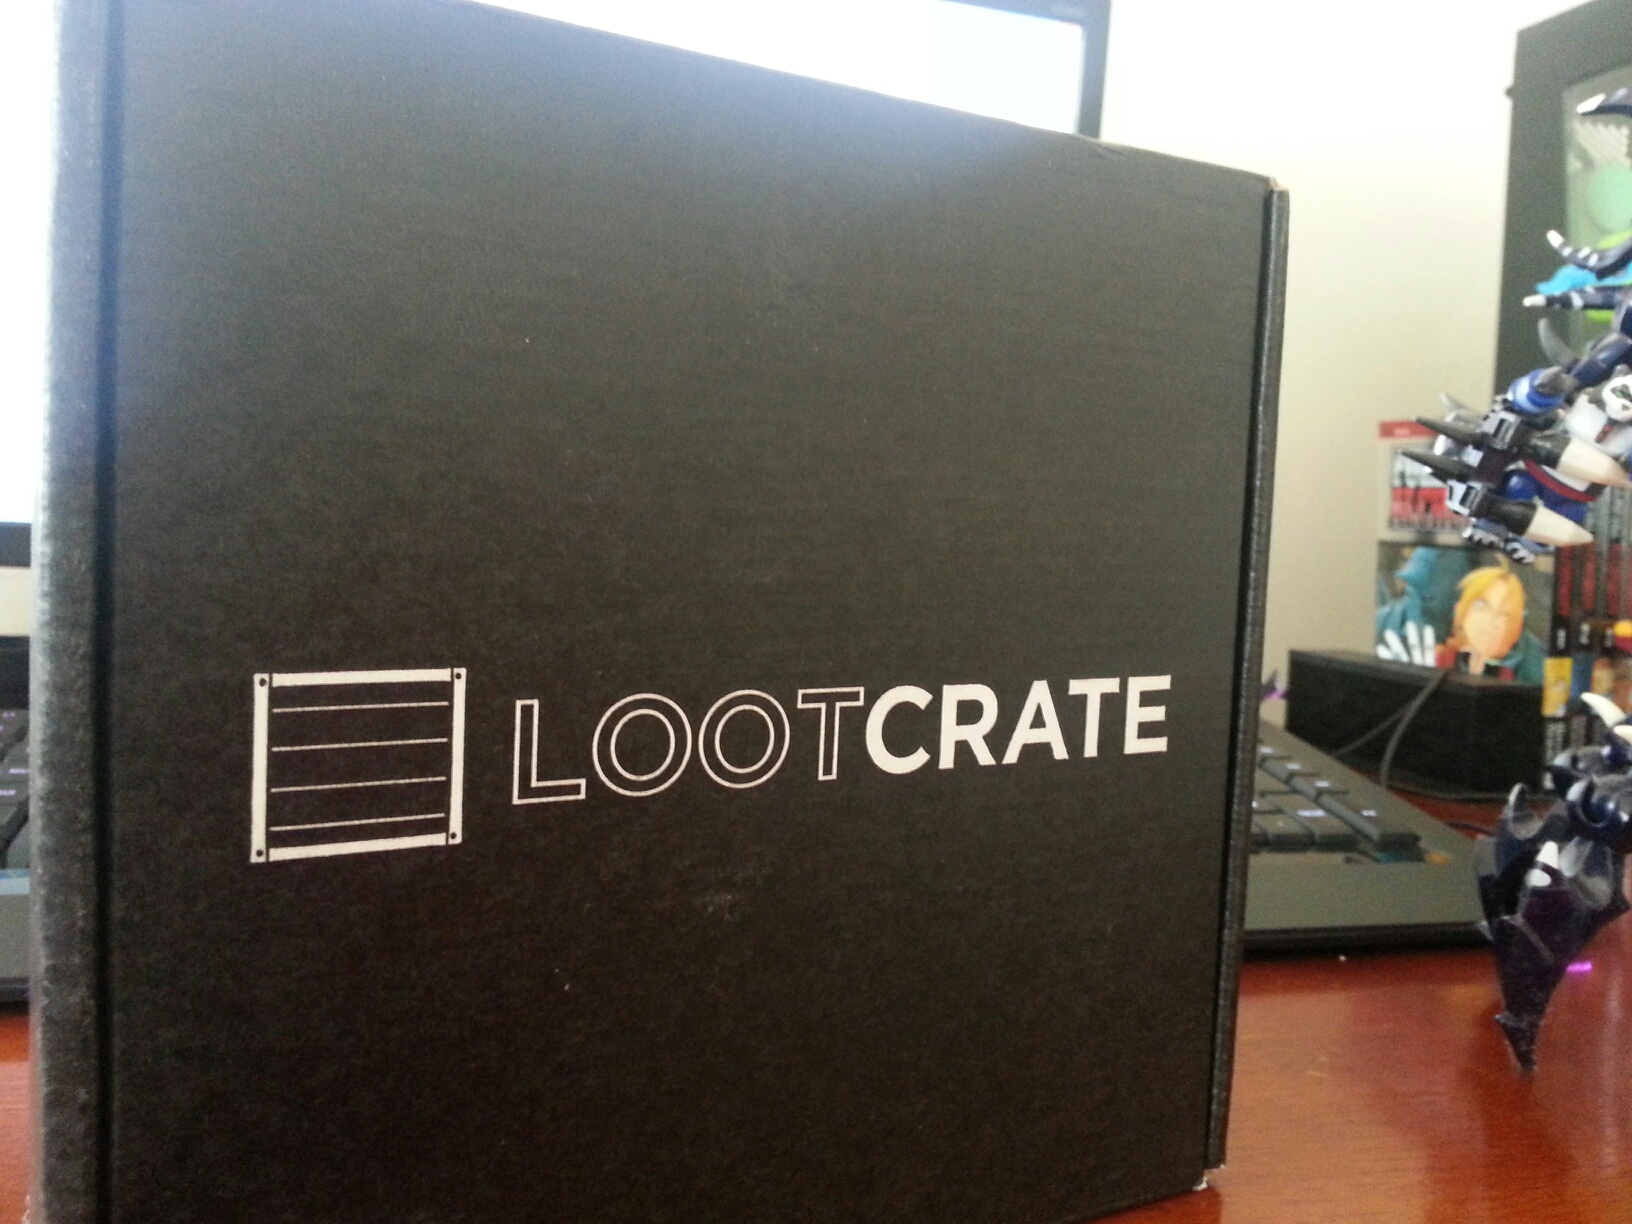 Geek insider, geekinsider, geekinsider. Com,, loot crate: january crate review, reviews